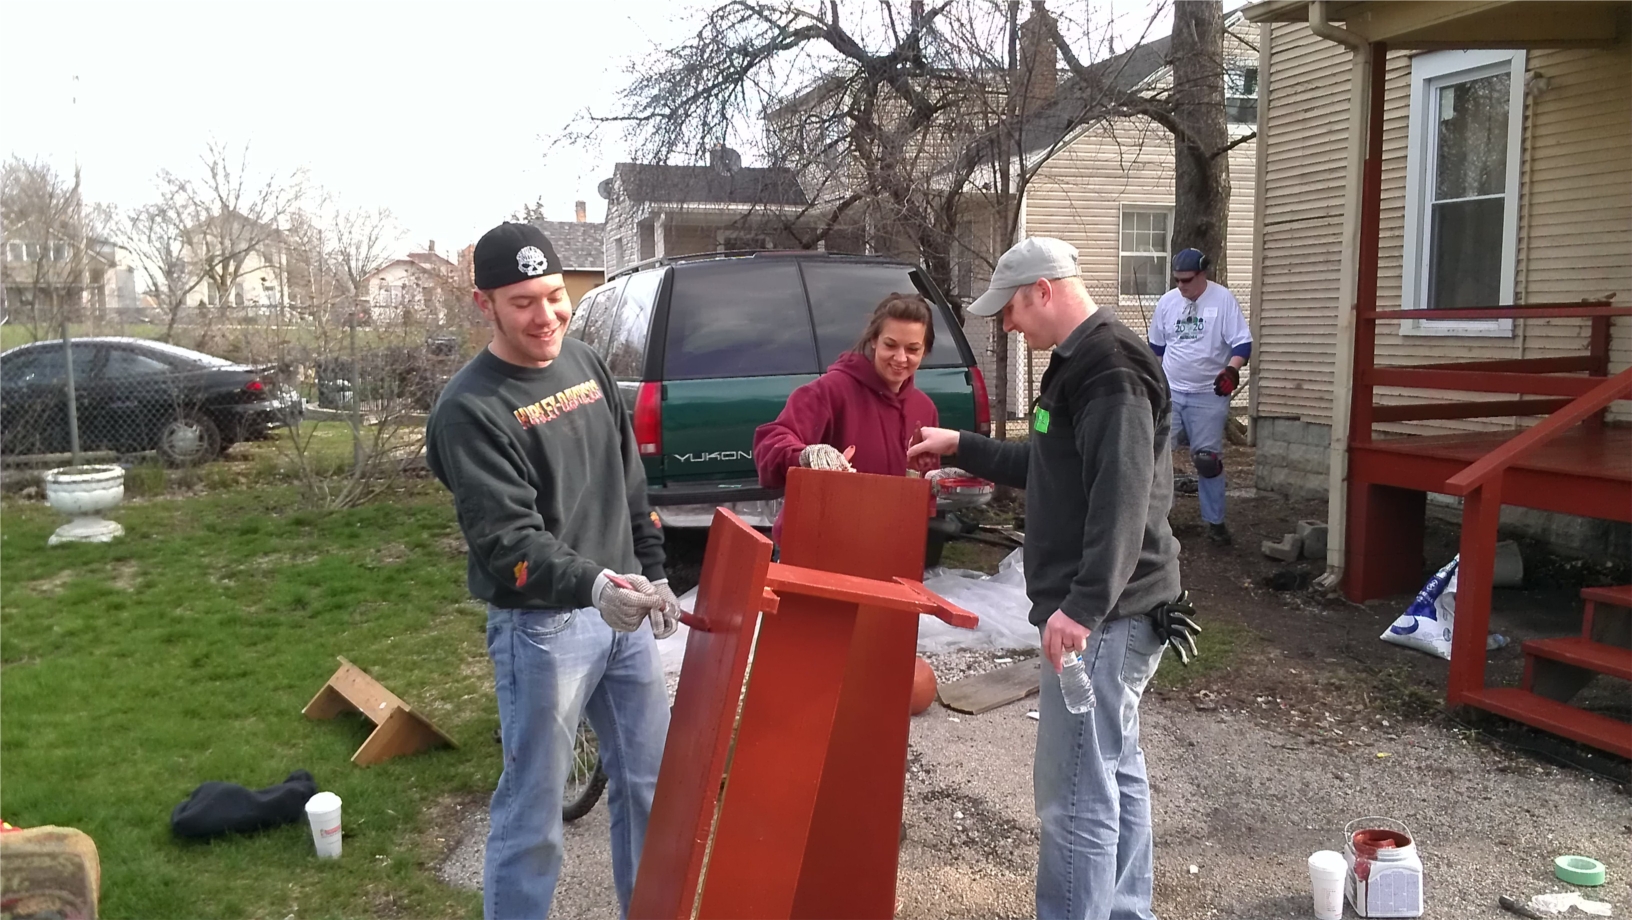 Volunteers from The Hartford’s Aurora office came together with other local companies to help restore homes in Aurora, IL as part of Rebuilding Auora. Volunteers worked on repairing, painting and cleaning a home as well as installing new landscaping.